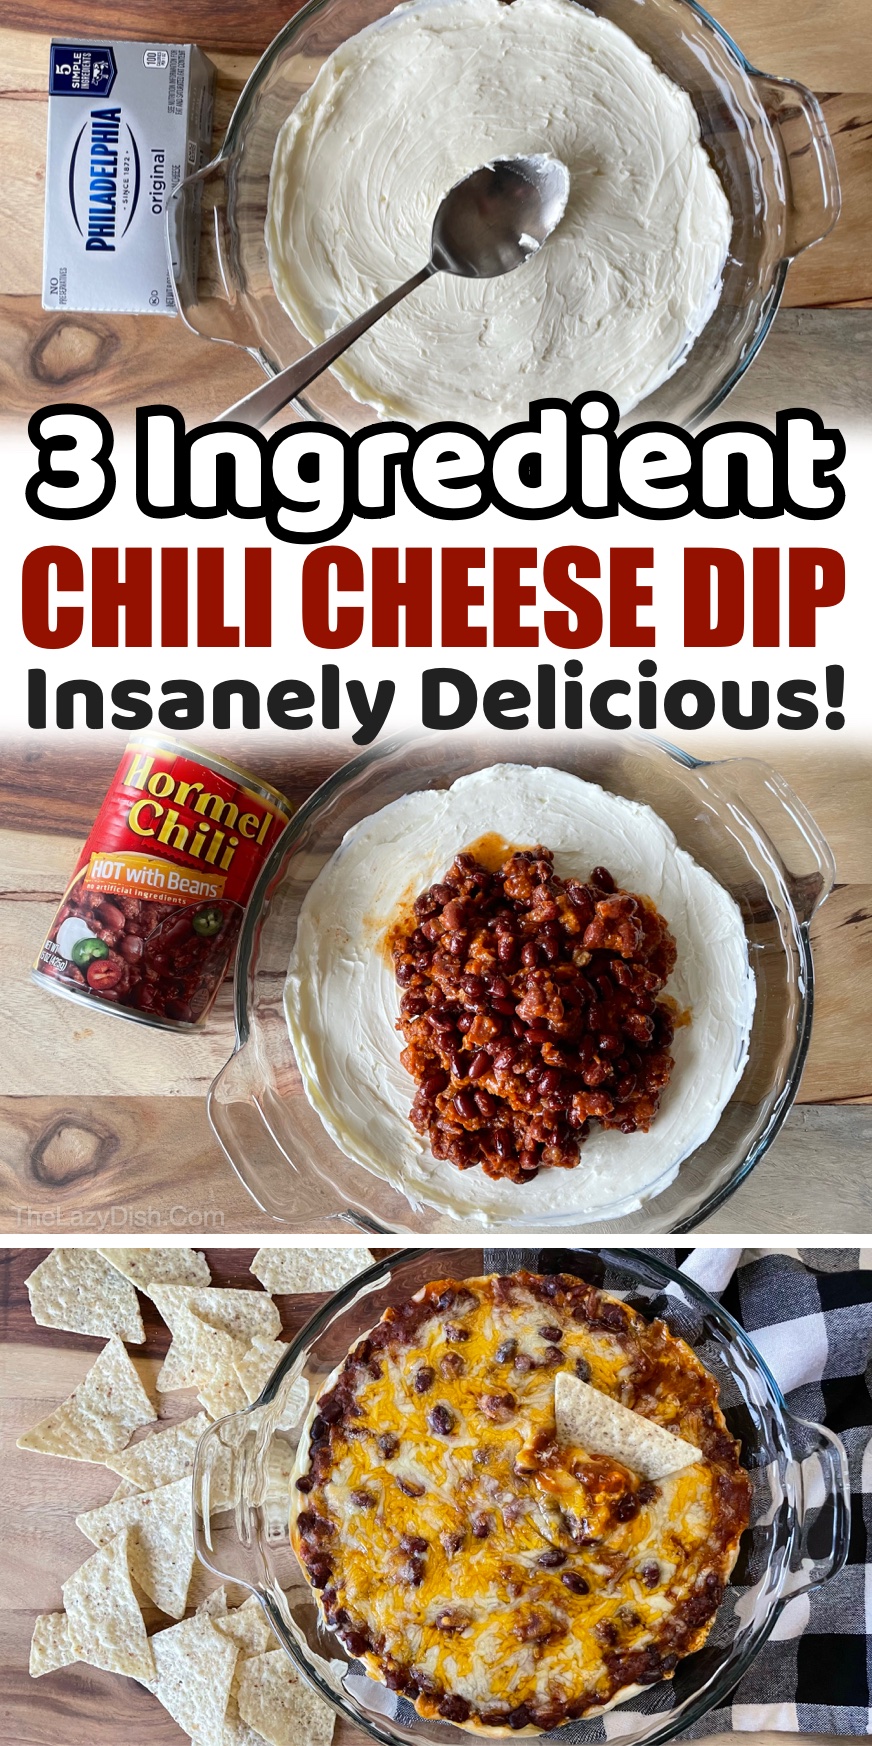 This crowd pleasing appetizer takes less than 5 minutes to prepare! Serve this easy warm dip with tortilla chips or Fritos scoops at your next party or family gathering. It's perfect for game day or football Sunday! It's always the first thing to disappear at parties. You just layer a block of cream cheese, a can of chili, and shredded cheese in a shallow baking dish and then bake for about 25 minutes. Insanely delicious and so quick and simple to make!